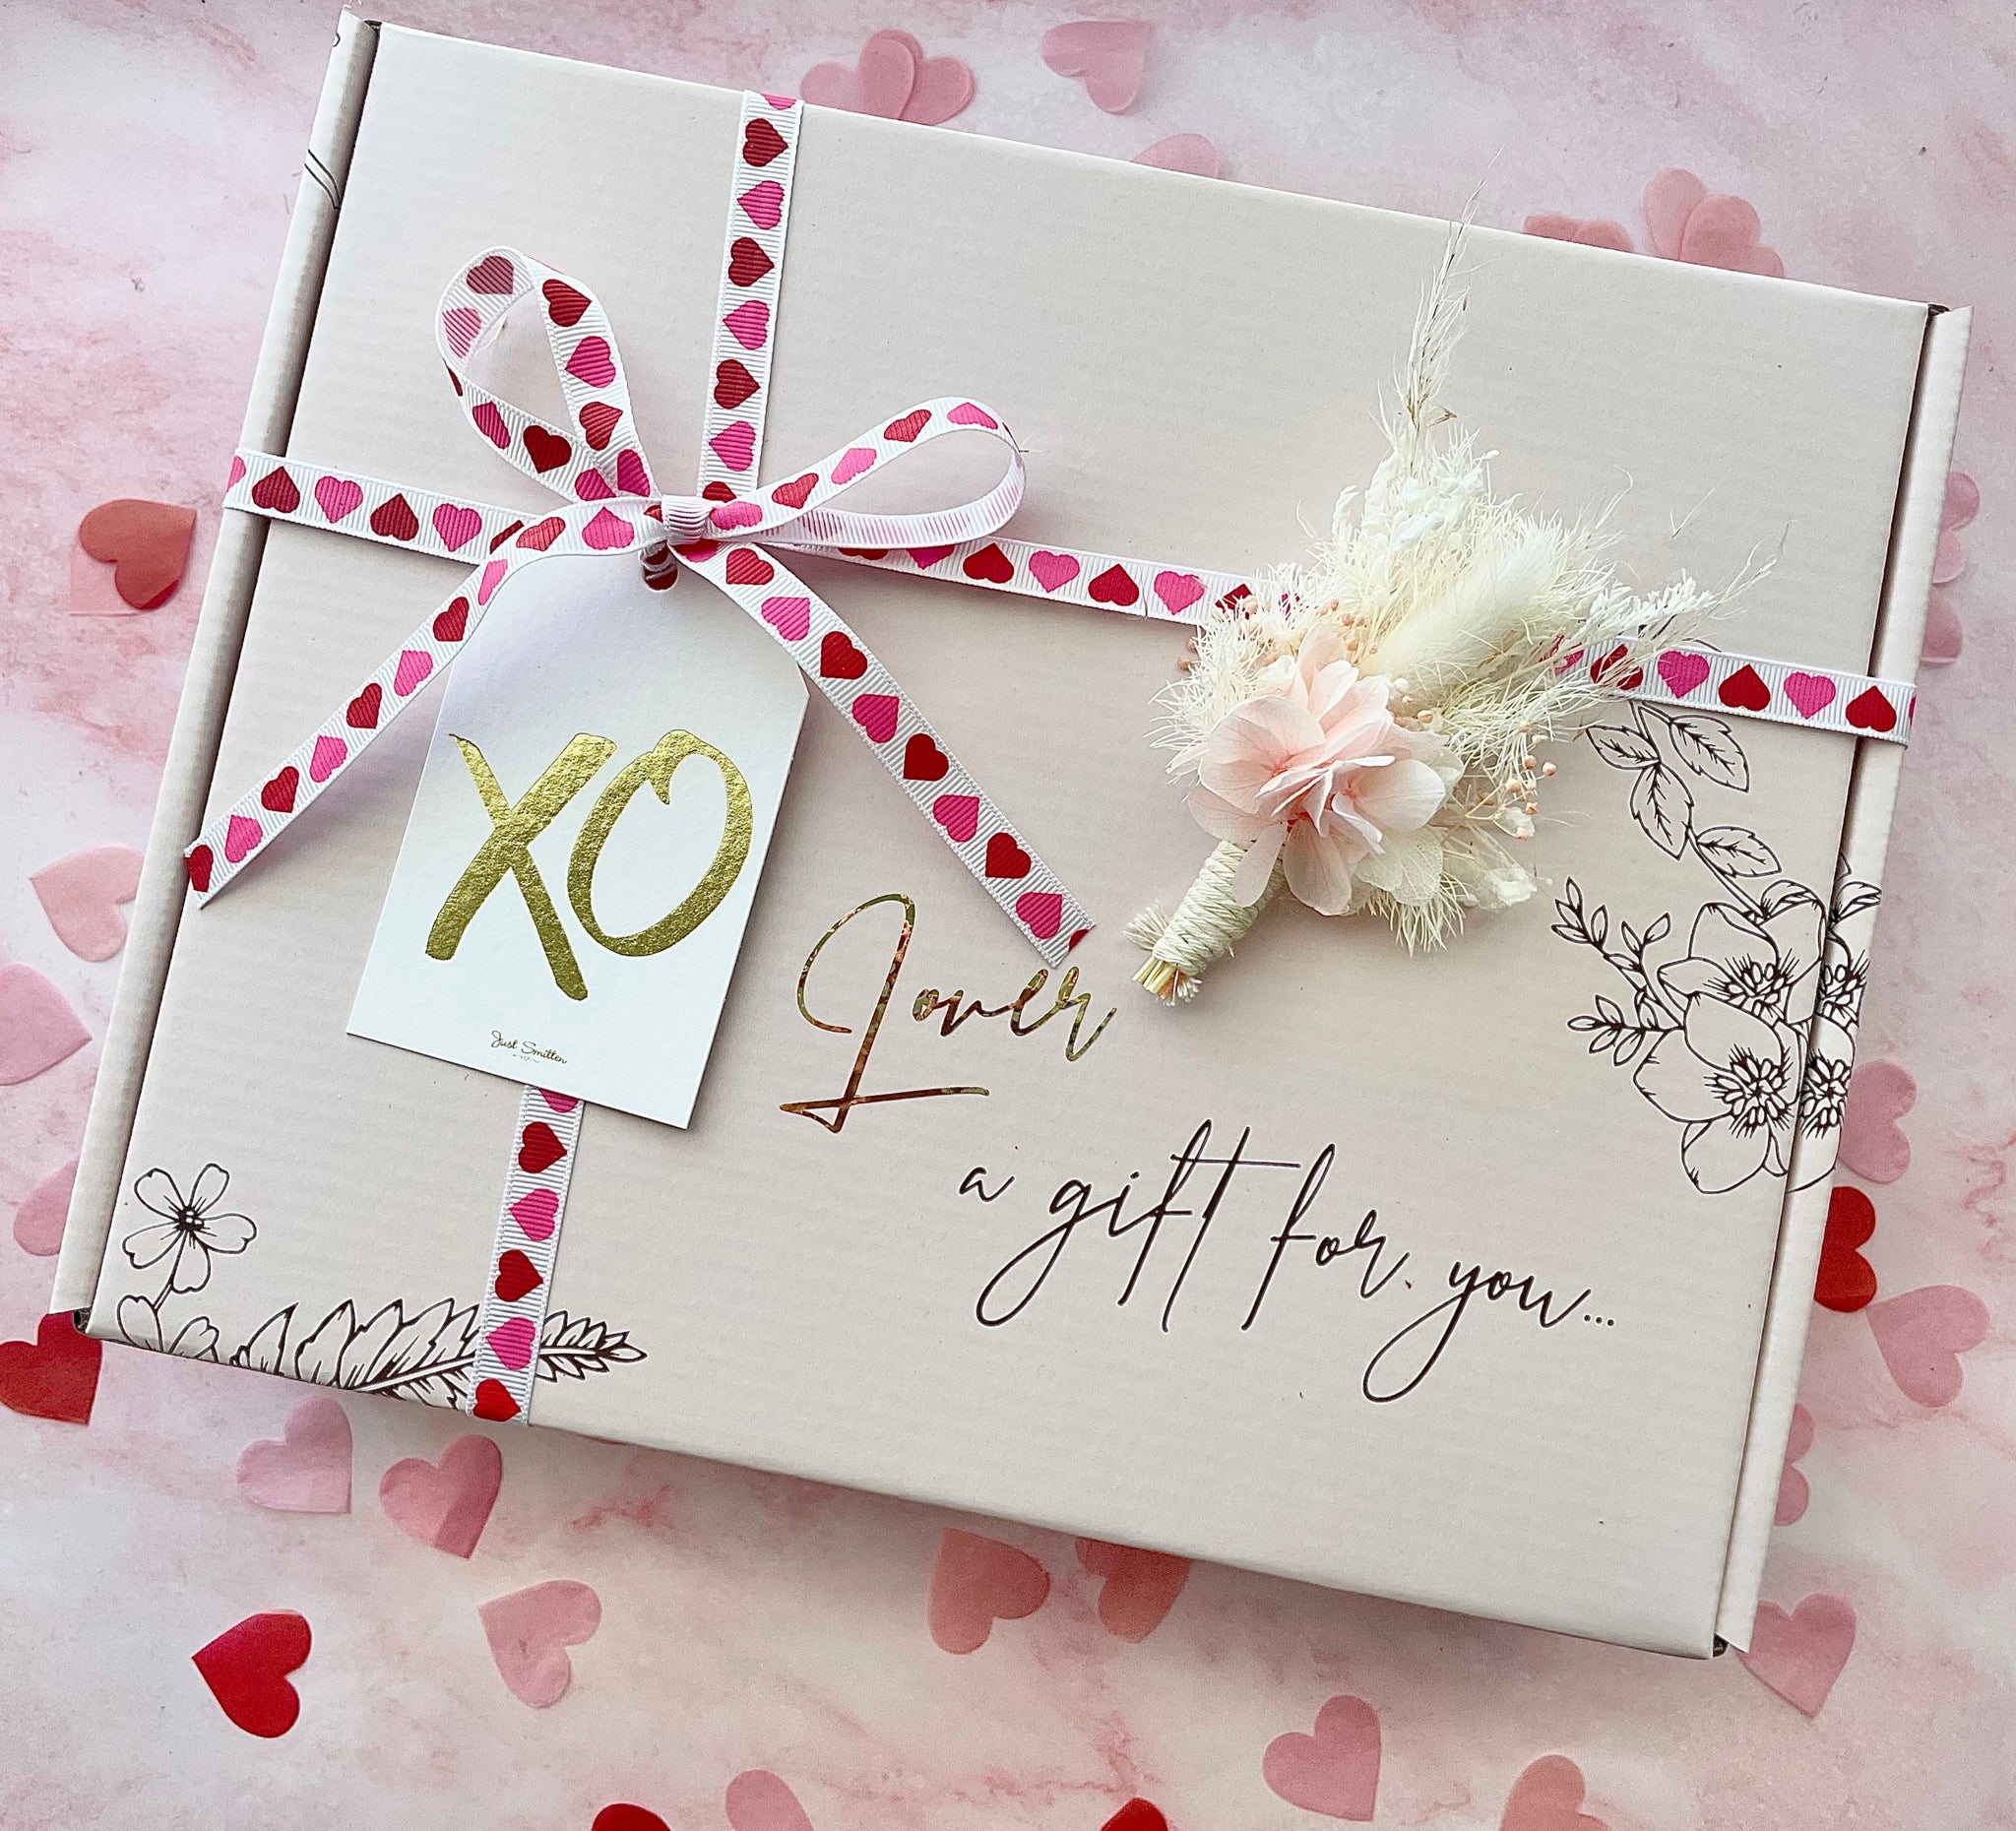 *Limited Edition* Valentine's Day Personalised Gift Box (inc name, ribbon, wood wool filling + FREE Gift Tag)